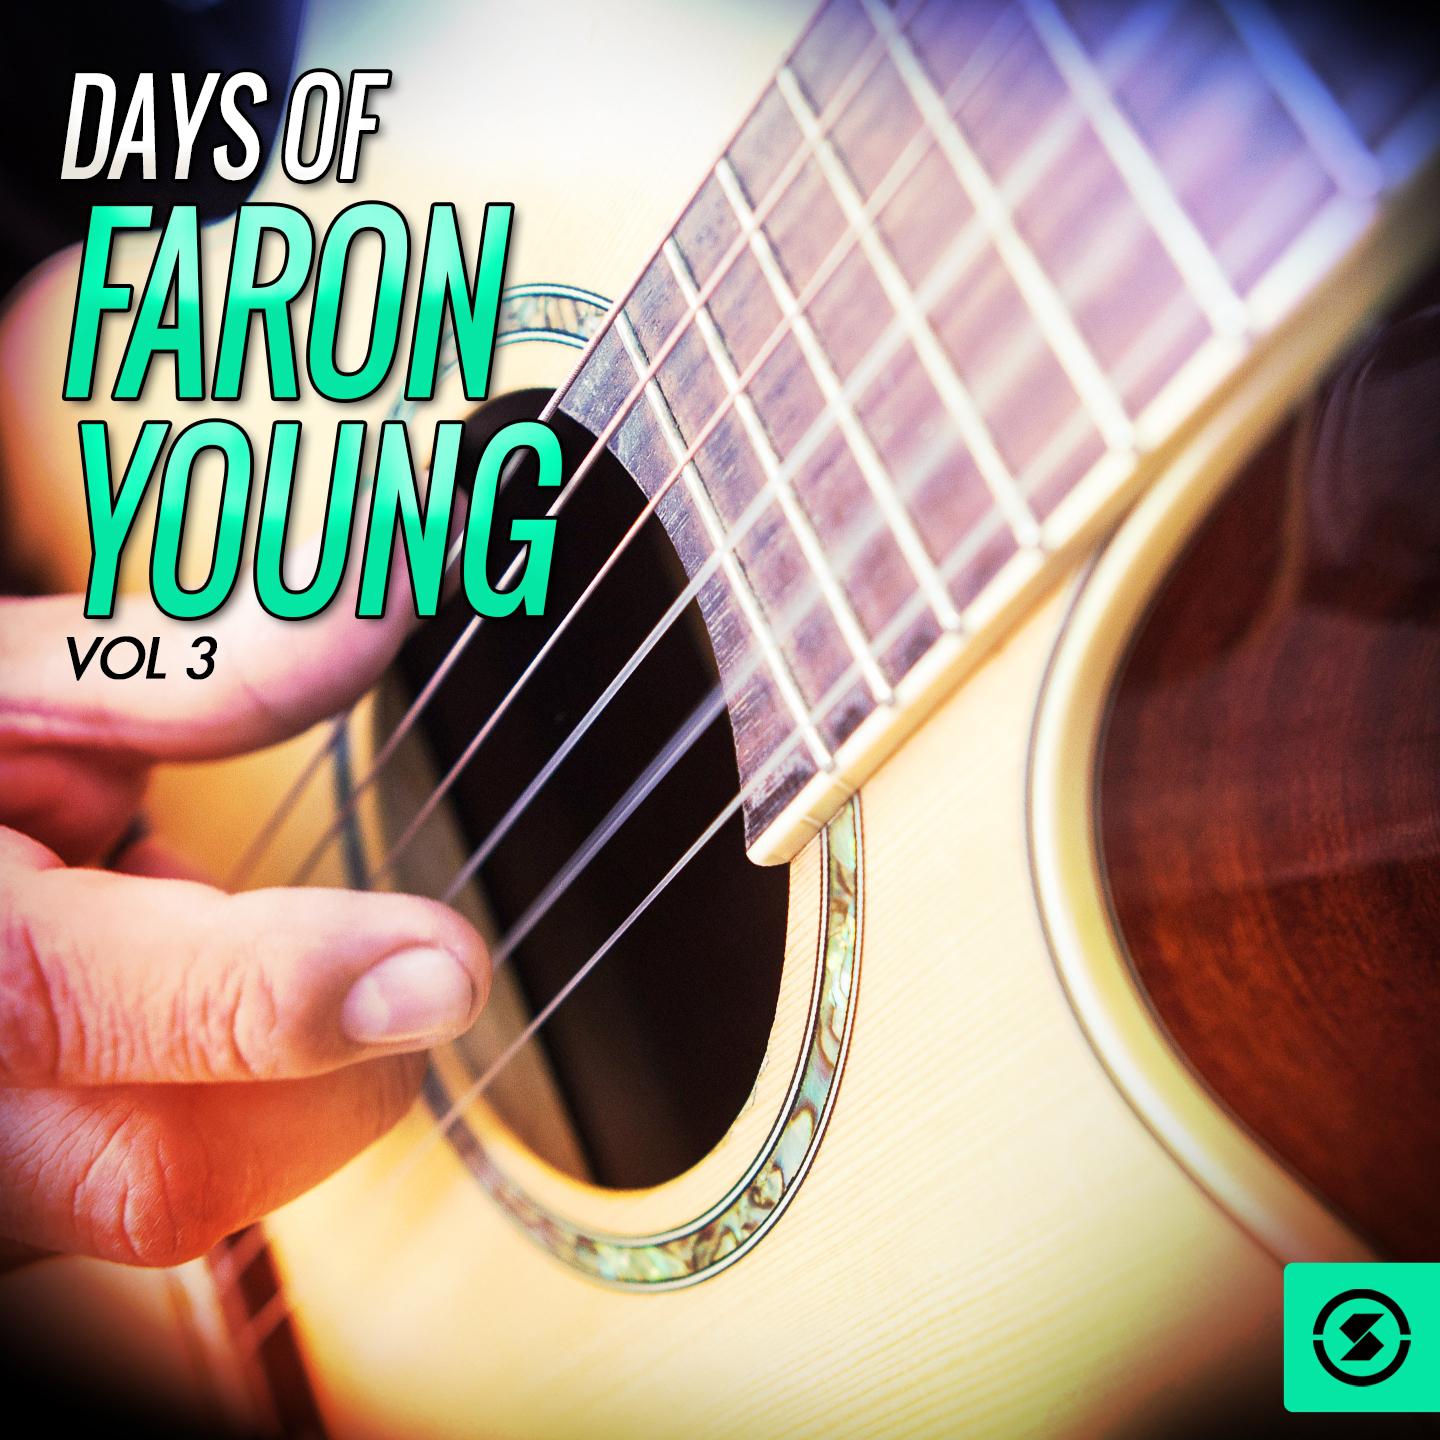 Days of Faron Young, Vol. 3